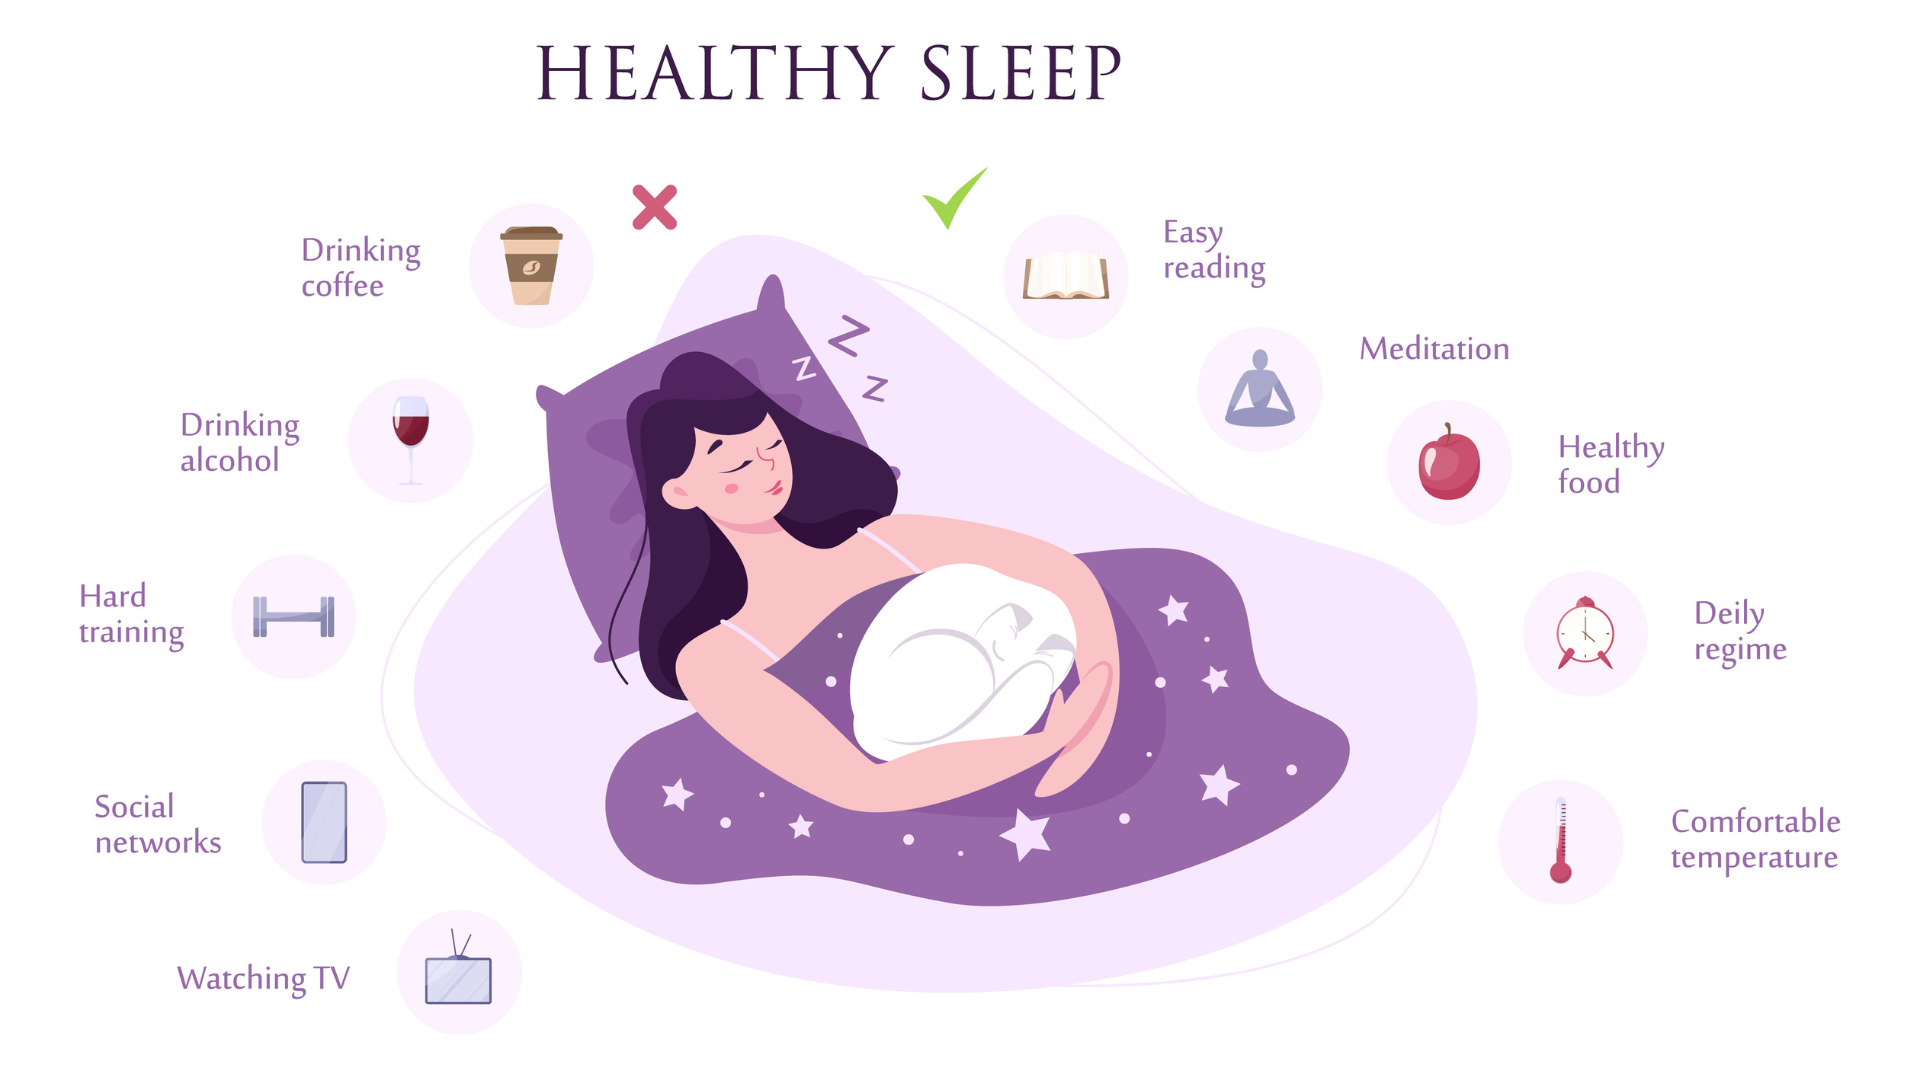 Rules of good healthy sleep at the night. List of advice to get rid of insomnia. Helpful brochure with guideline. Recommendation for good sleeping which prevents many health problems including helping seniors with osteoporosis.